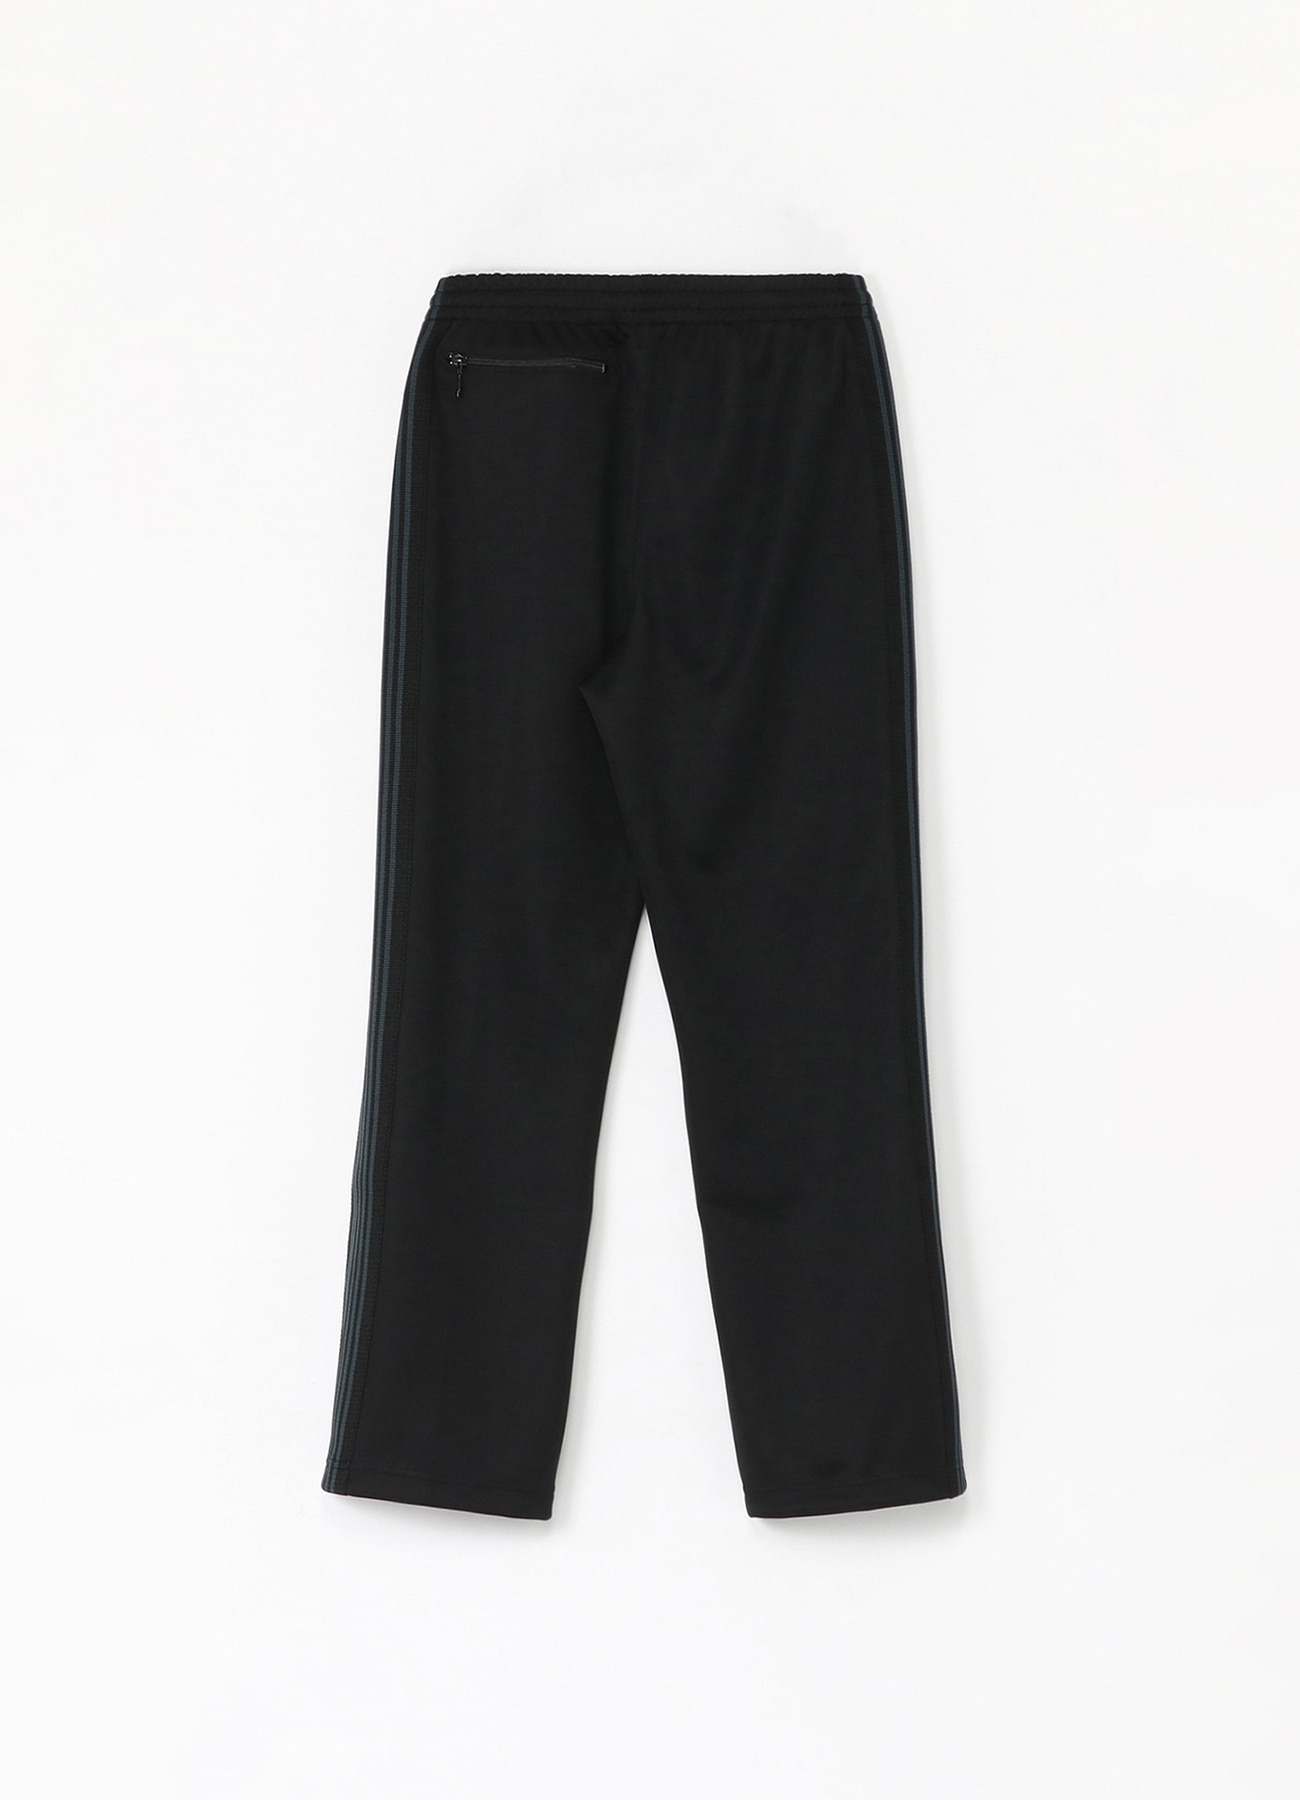 WILDSIDE x NEEDLES Track Pant (XS CHARCOALxBLACK): NEPENTHES